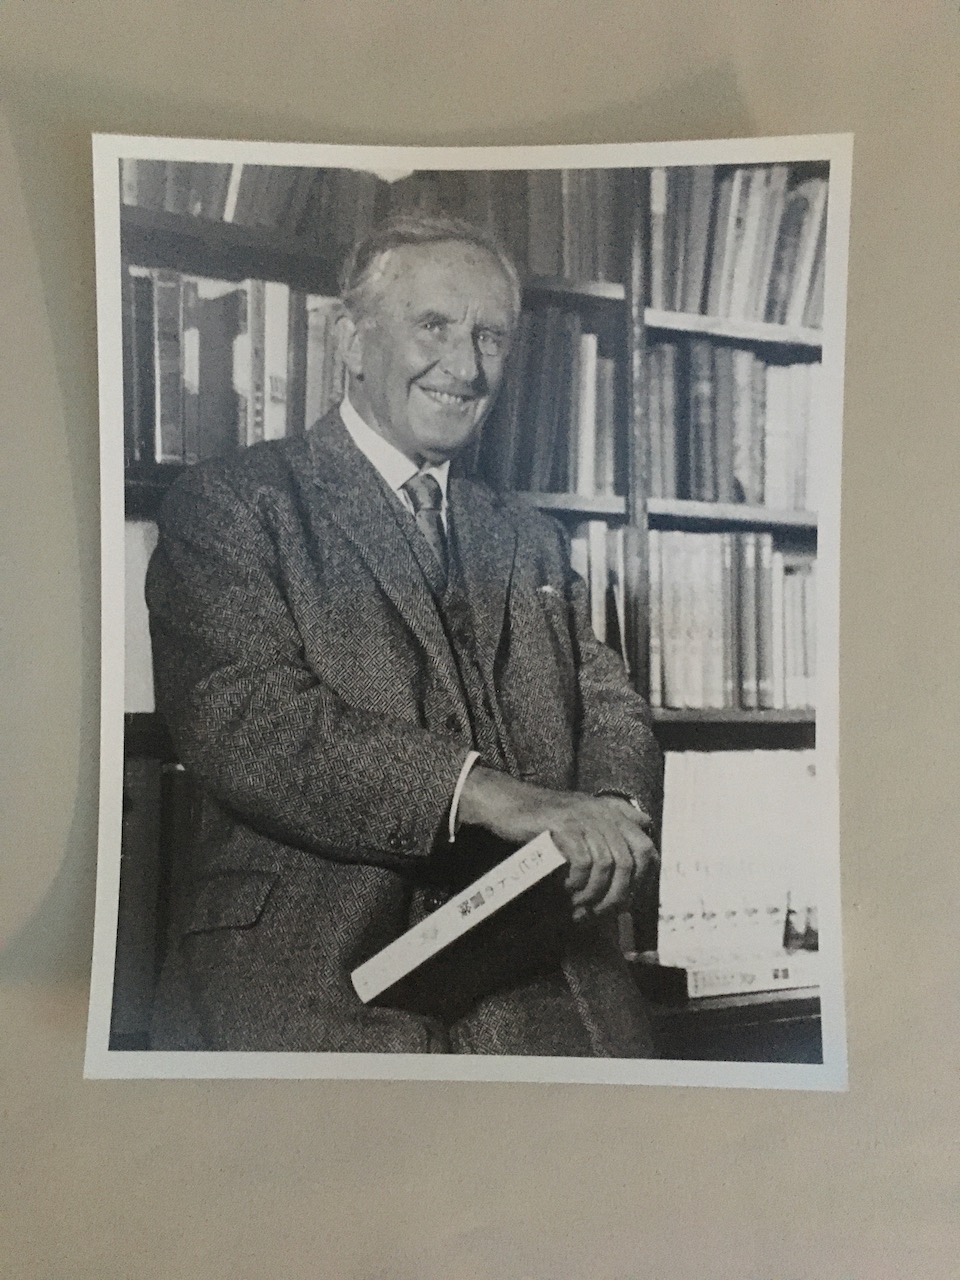 Exclusive Photographic Print: J.R.R. Tolkien stands before his bookshelves, laughing, with a Japanese edition of his work in hand